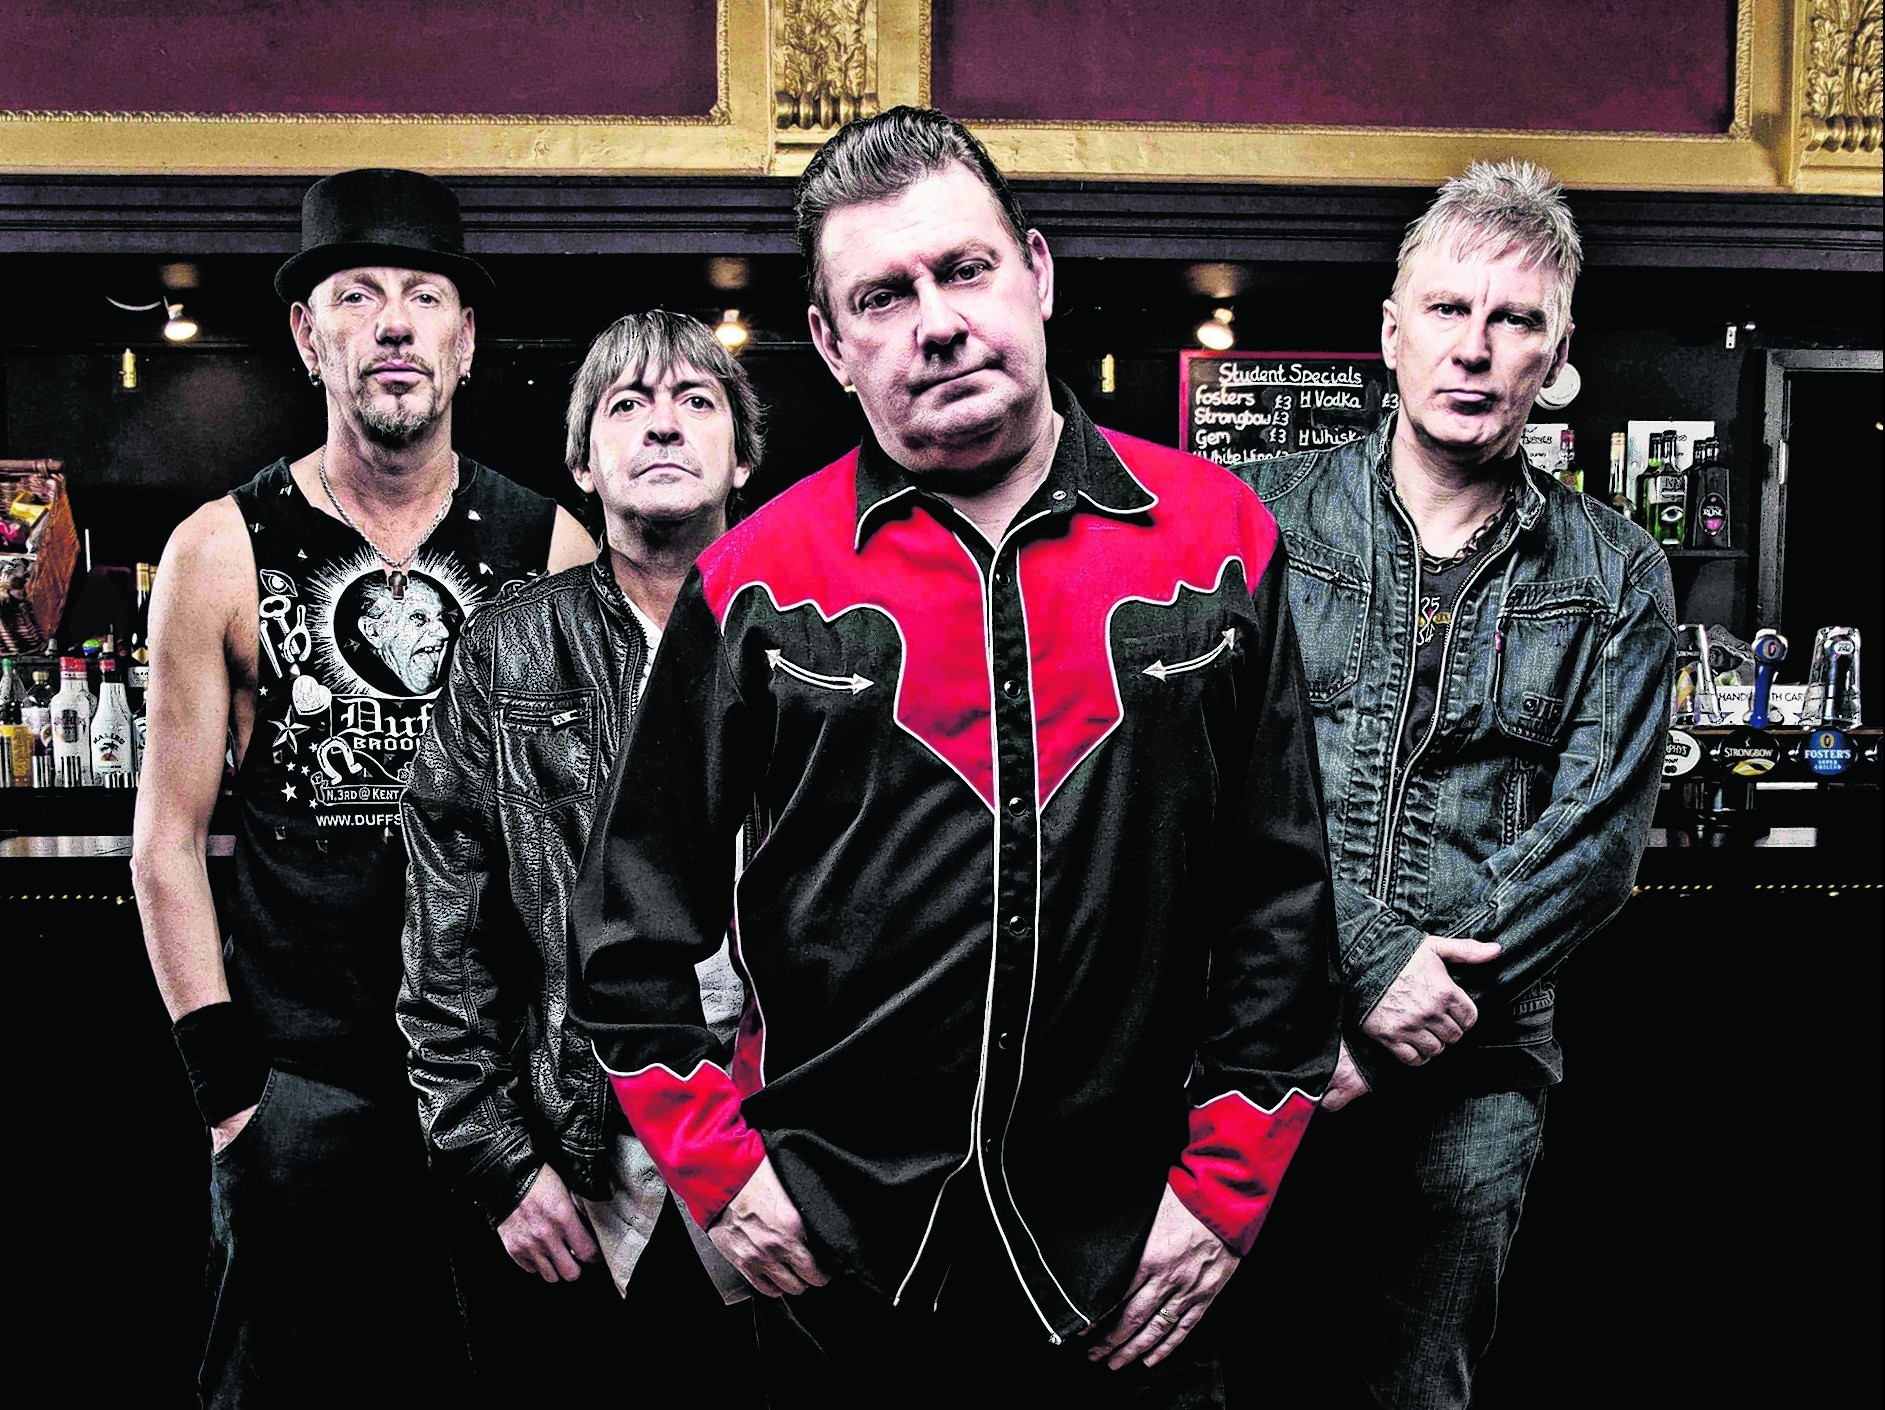 Jake Burns, front, with the rest of Stiff Little Fingers. PHOTO: Ashley Maile